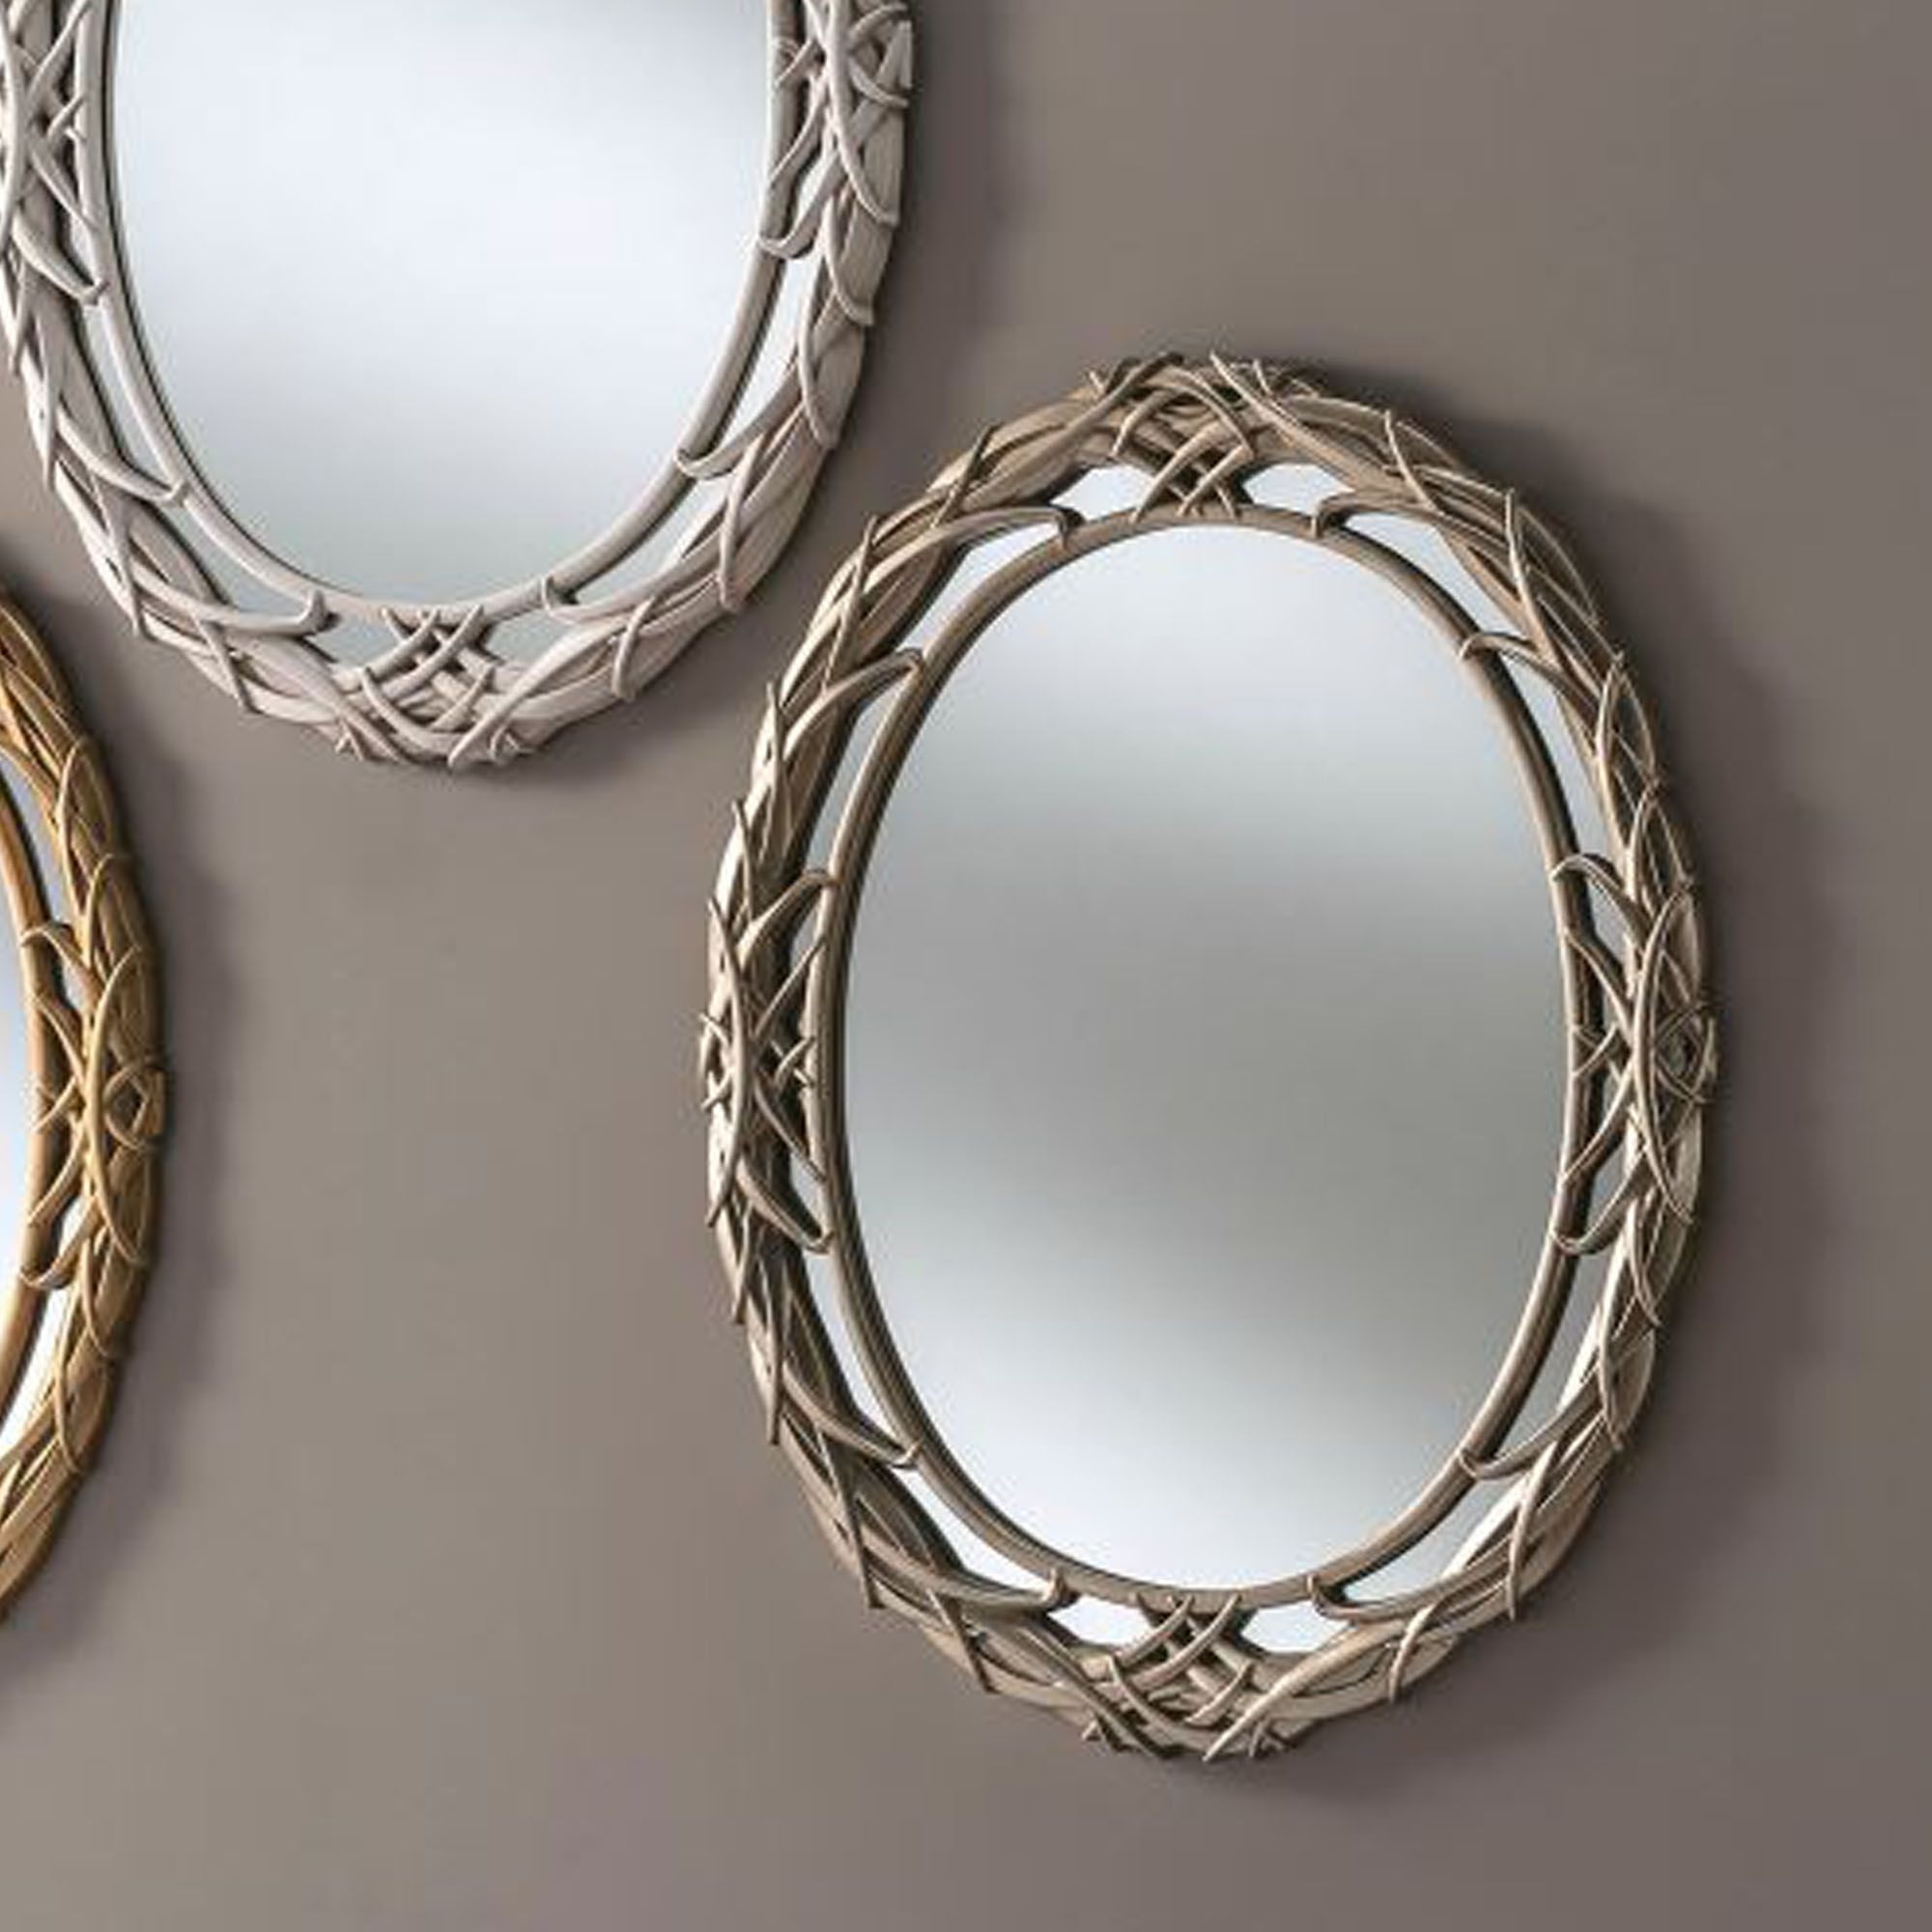 Oval Silver Decorative Wall Mirror | Mirrors | Homesdirect365 Throughout Nickel Framed Oval Wall Mirrors (View 6 of 15)